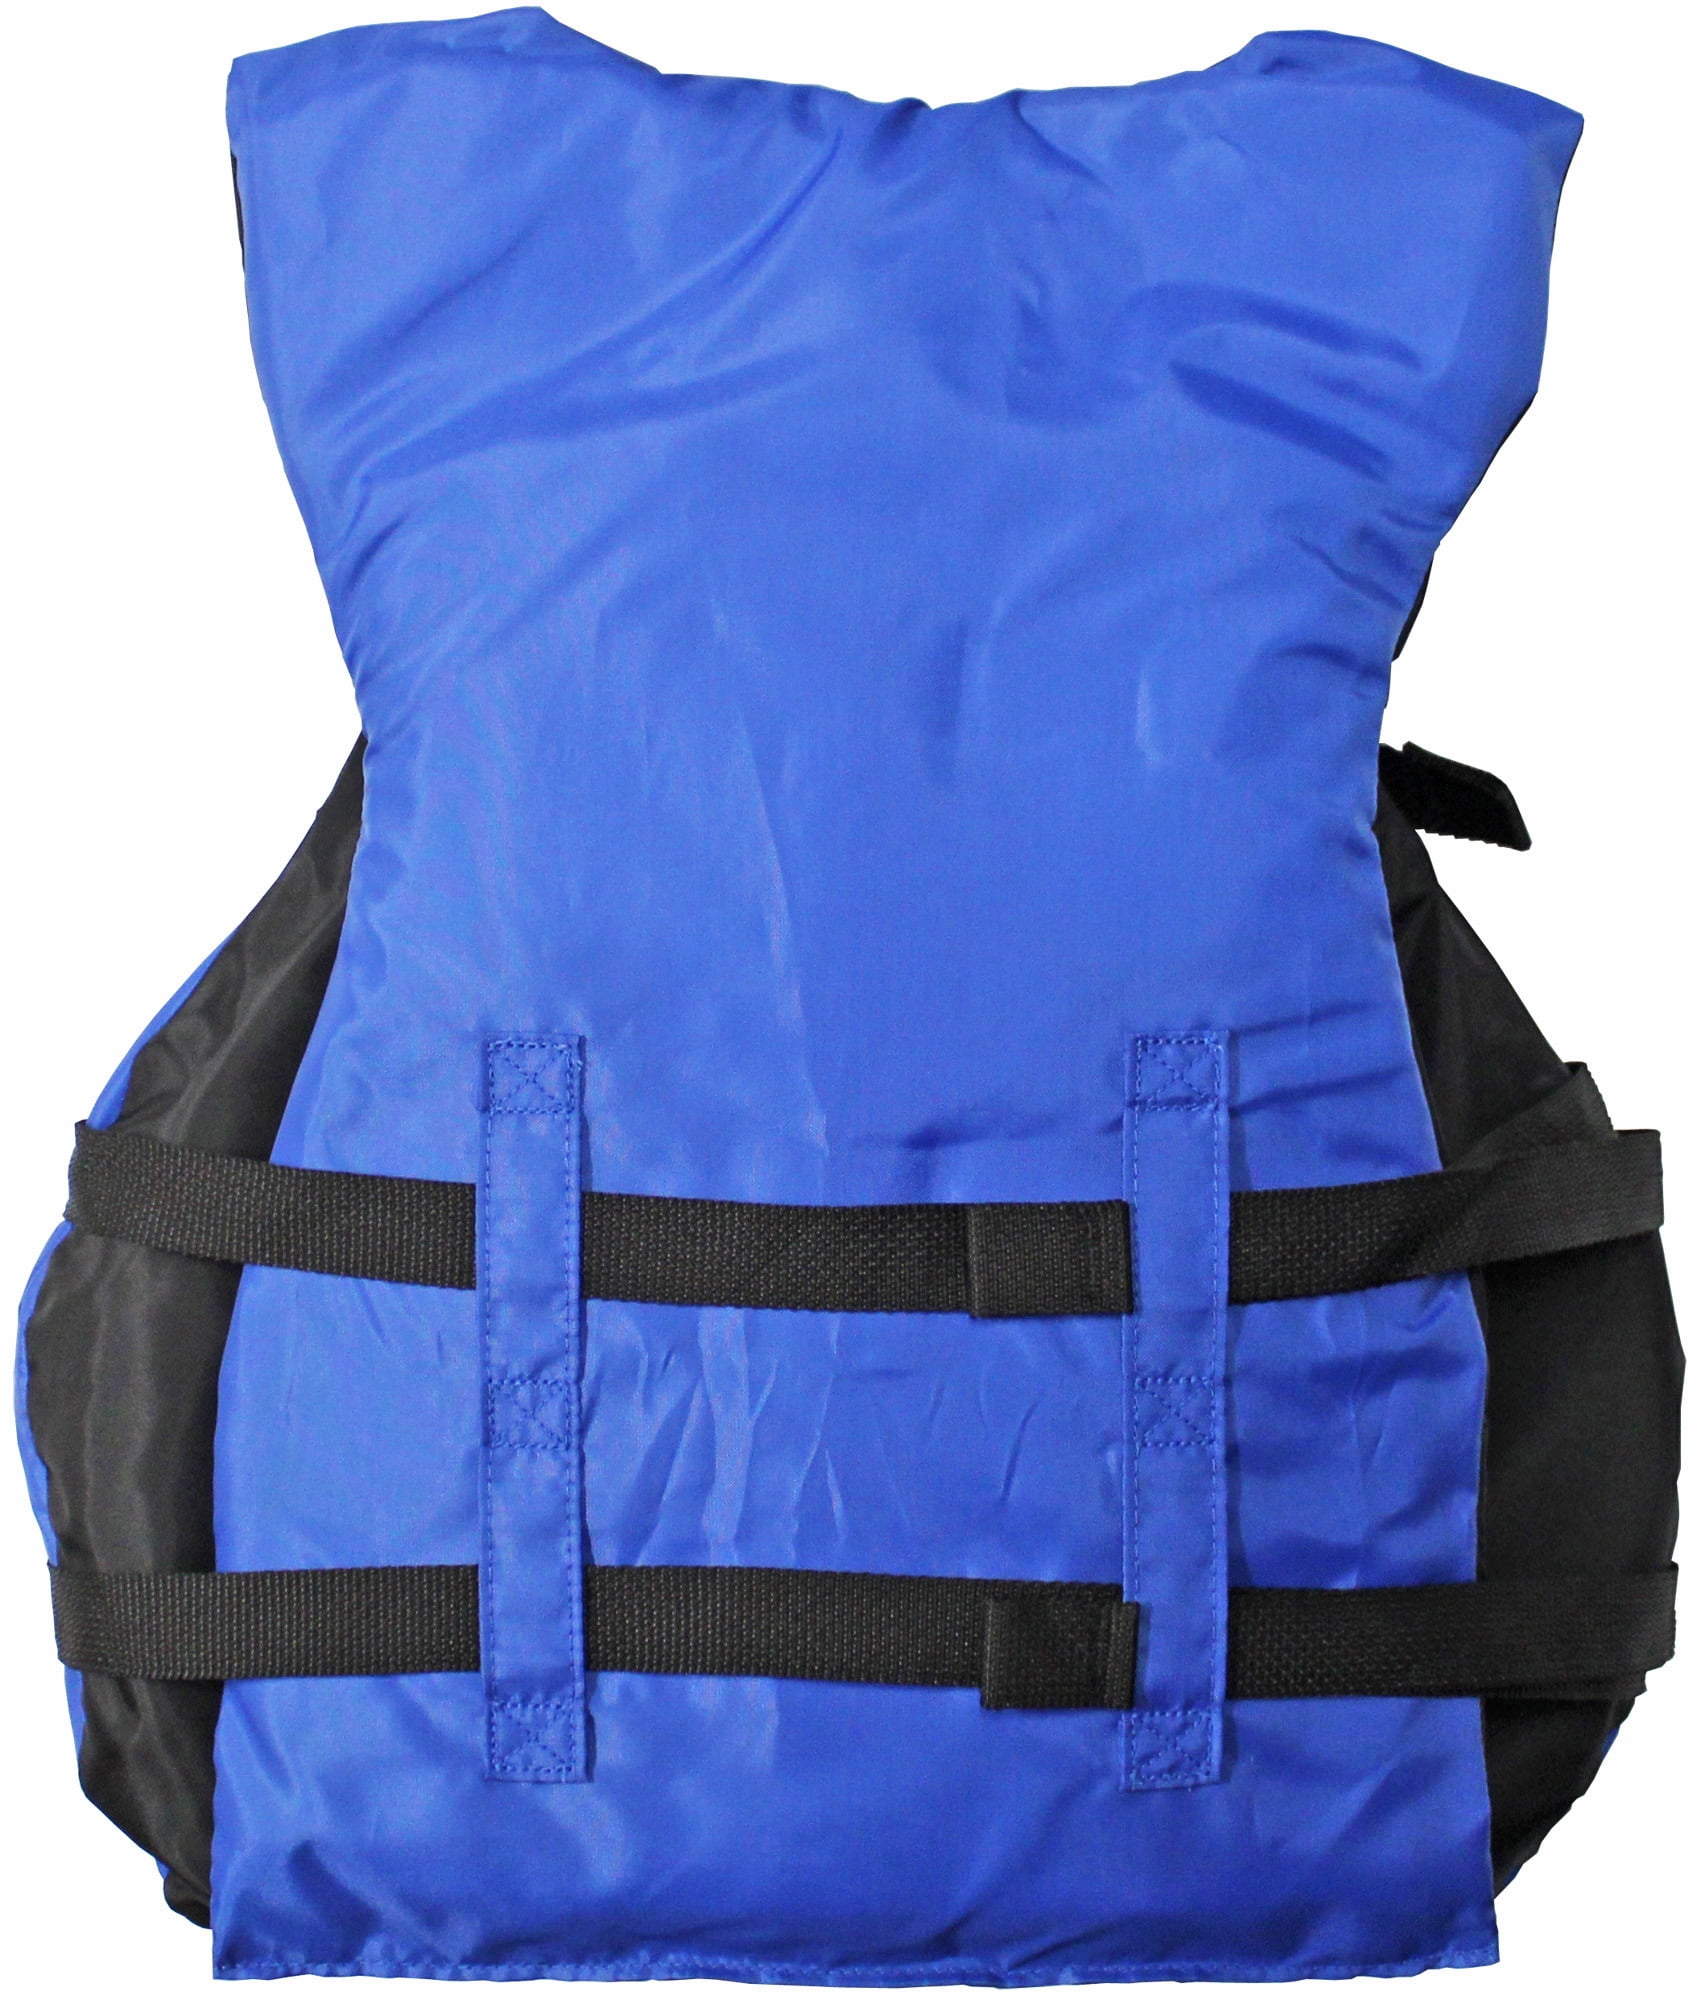  BLUESTORM Sportsman Life Jacket PFD for Adults - US Coast Guard  (USCG) Approved Type 3 Life Vest Preserver for Fishing, Kayaking, & More  (Deep Blue, L/XL) : Sports & Outdoors